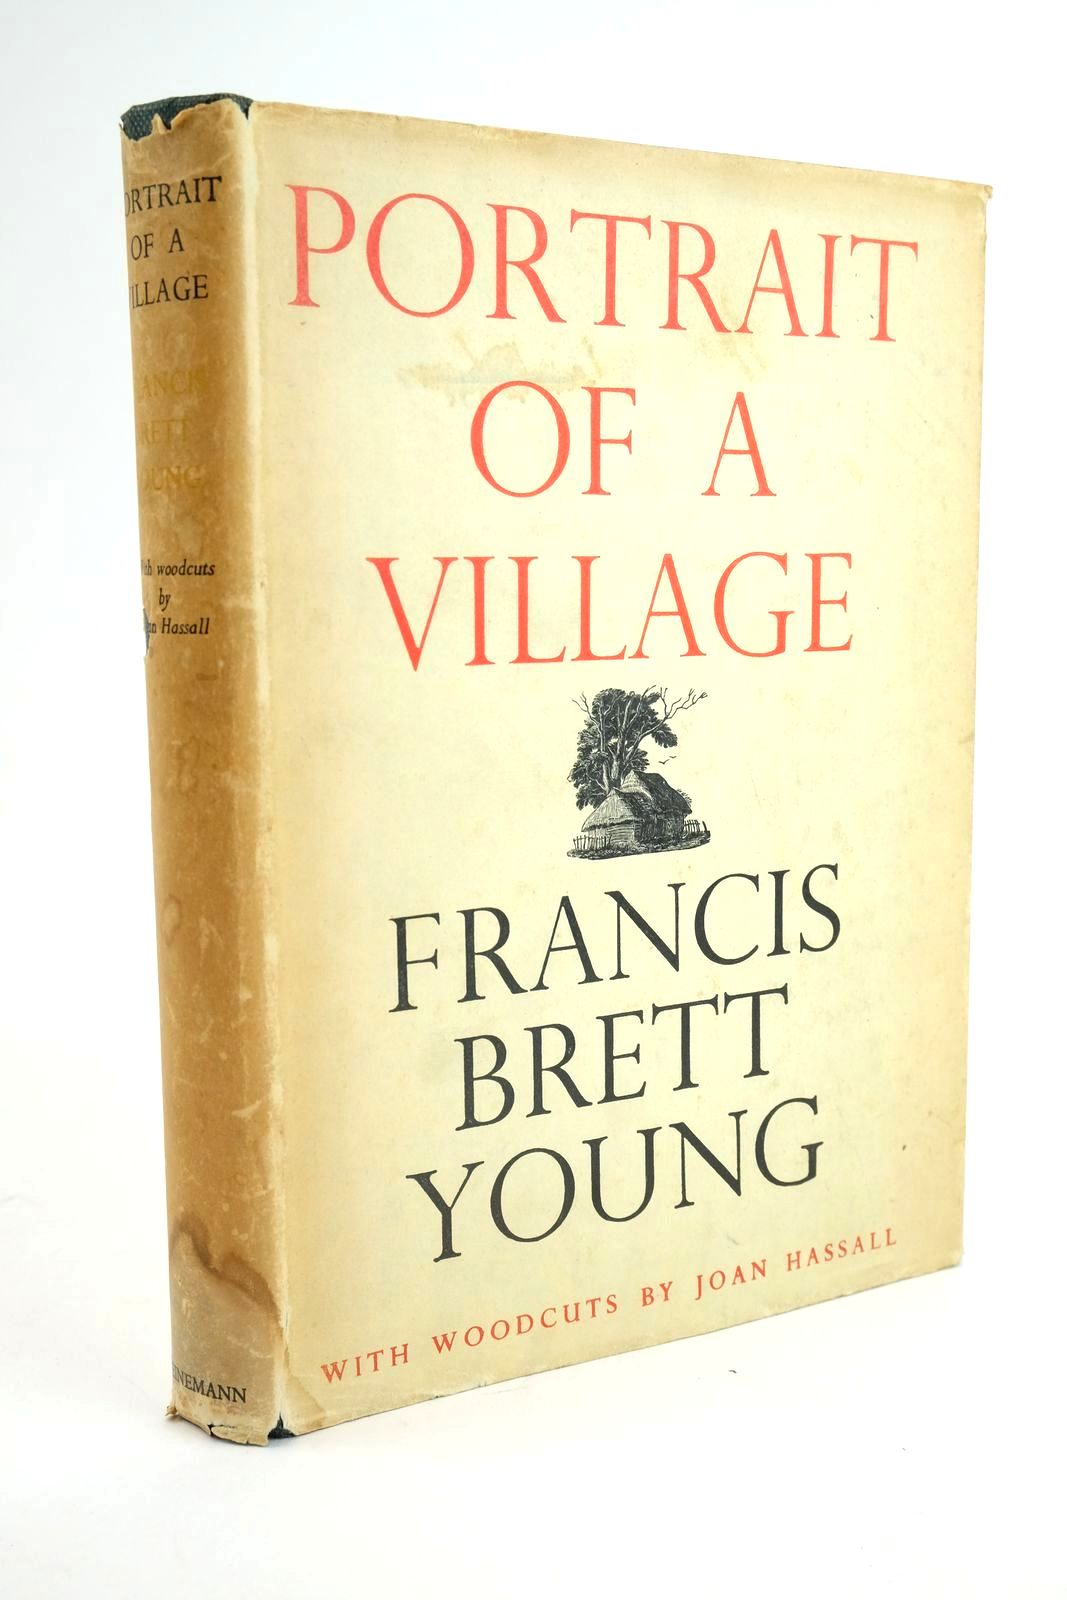 Photo of PORTRAIT OF A VILLAGE written by Young, Francis Brett illustrated by Hassall, Joan published by William Heinemann (STOCK CODE: 1323737)  for sale by Stella & Rose's Books